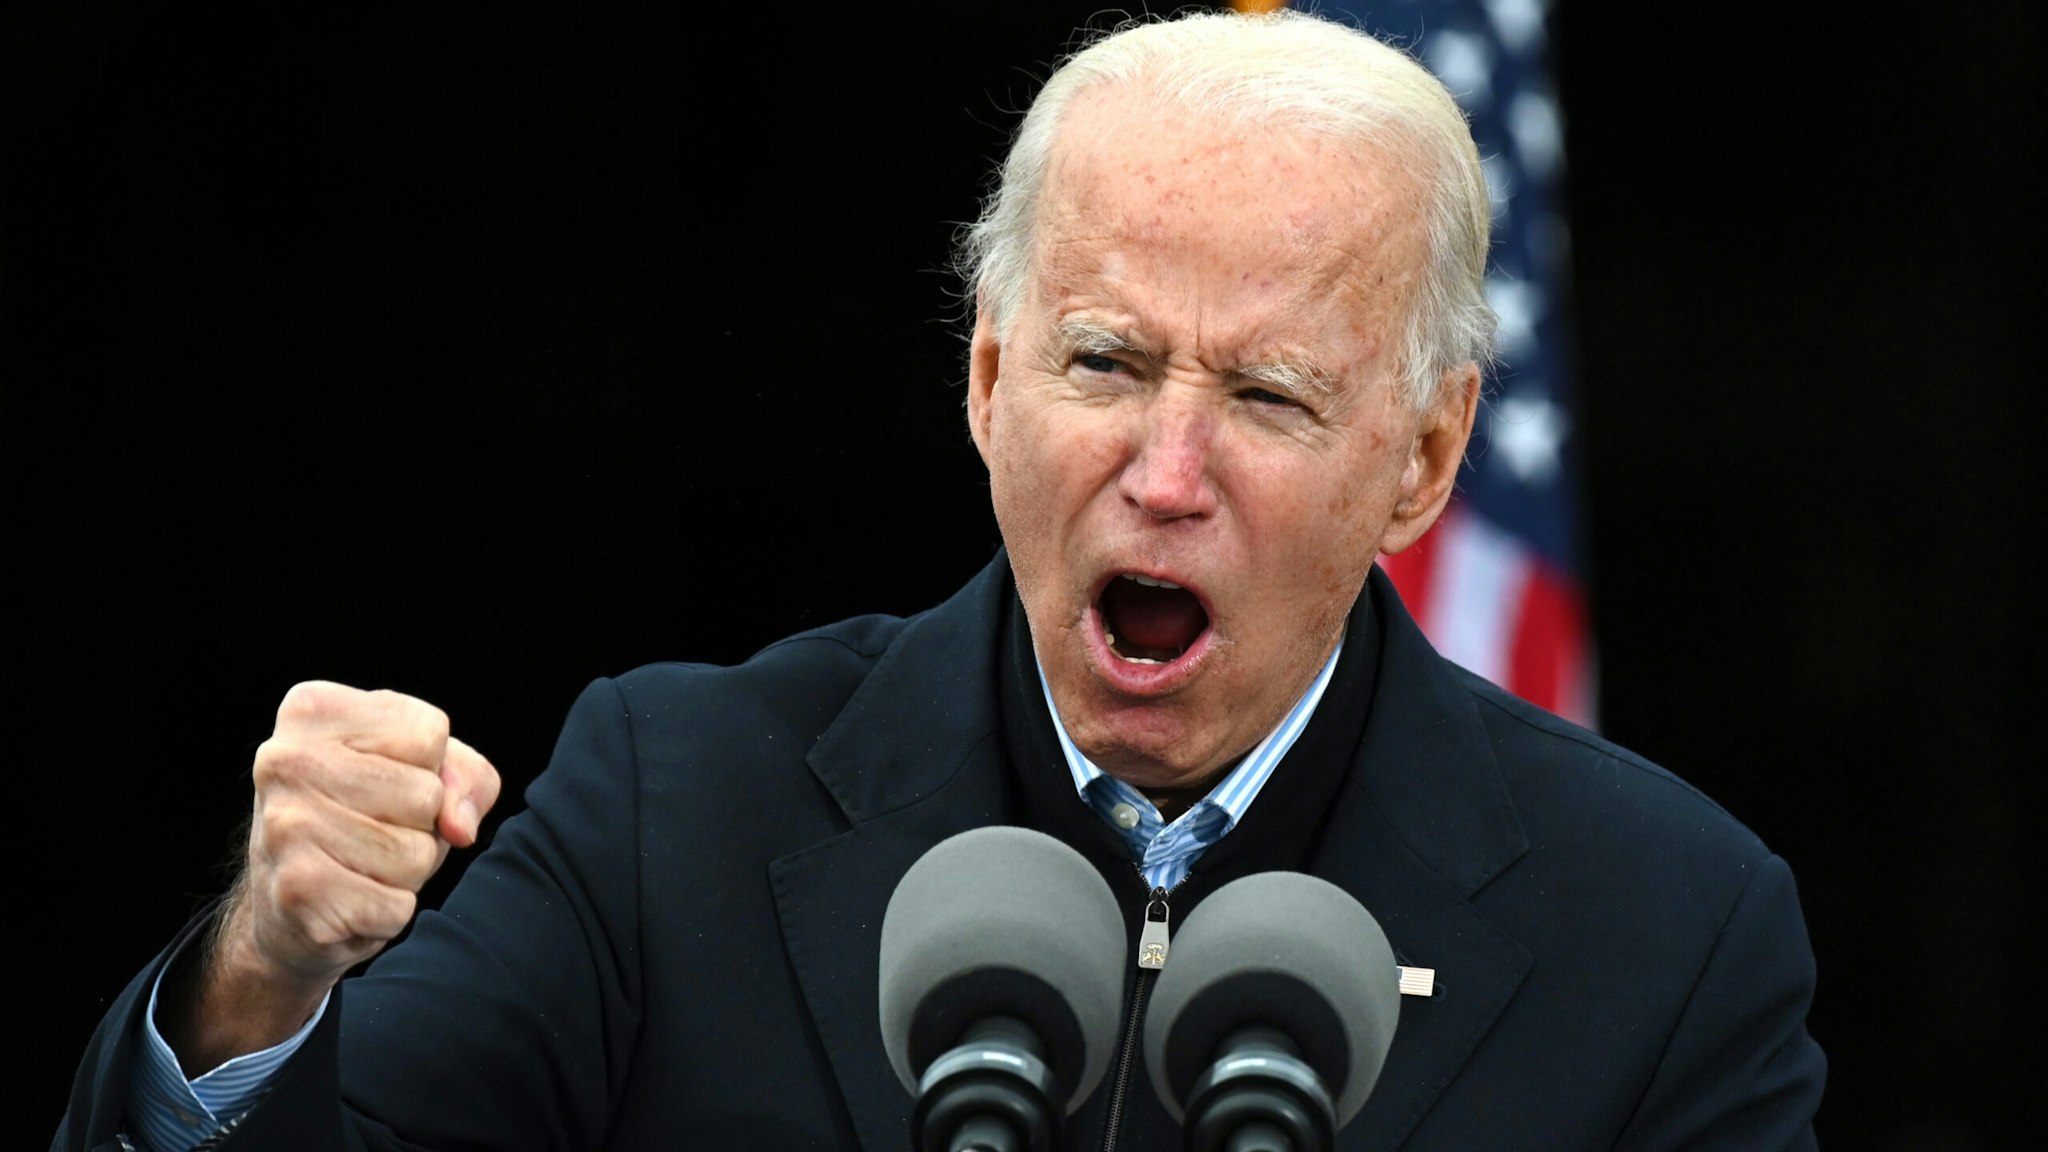 TOPSHOT - US President-elect Joe Biden gestures as he speaks during a campaign rally to support Democratic Senate candidates in Atlanta, Georgia on December 15, 2020. - US President-elect Joe Biden travelled to Georgia to campaign for Democratic Senate candidates Jon Ossoff and Reverend Raphael Warnock.